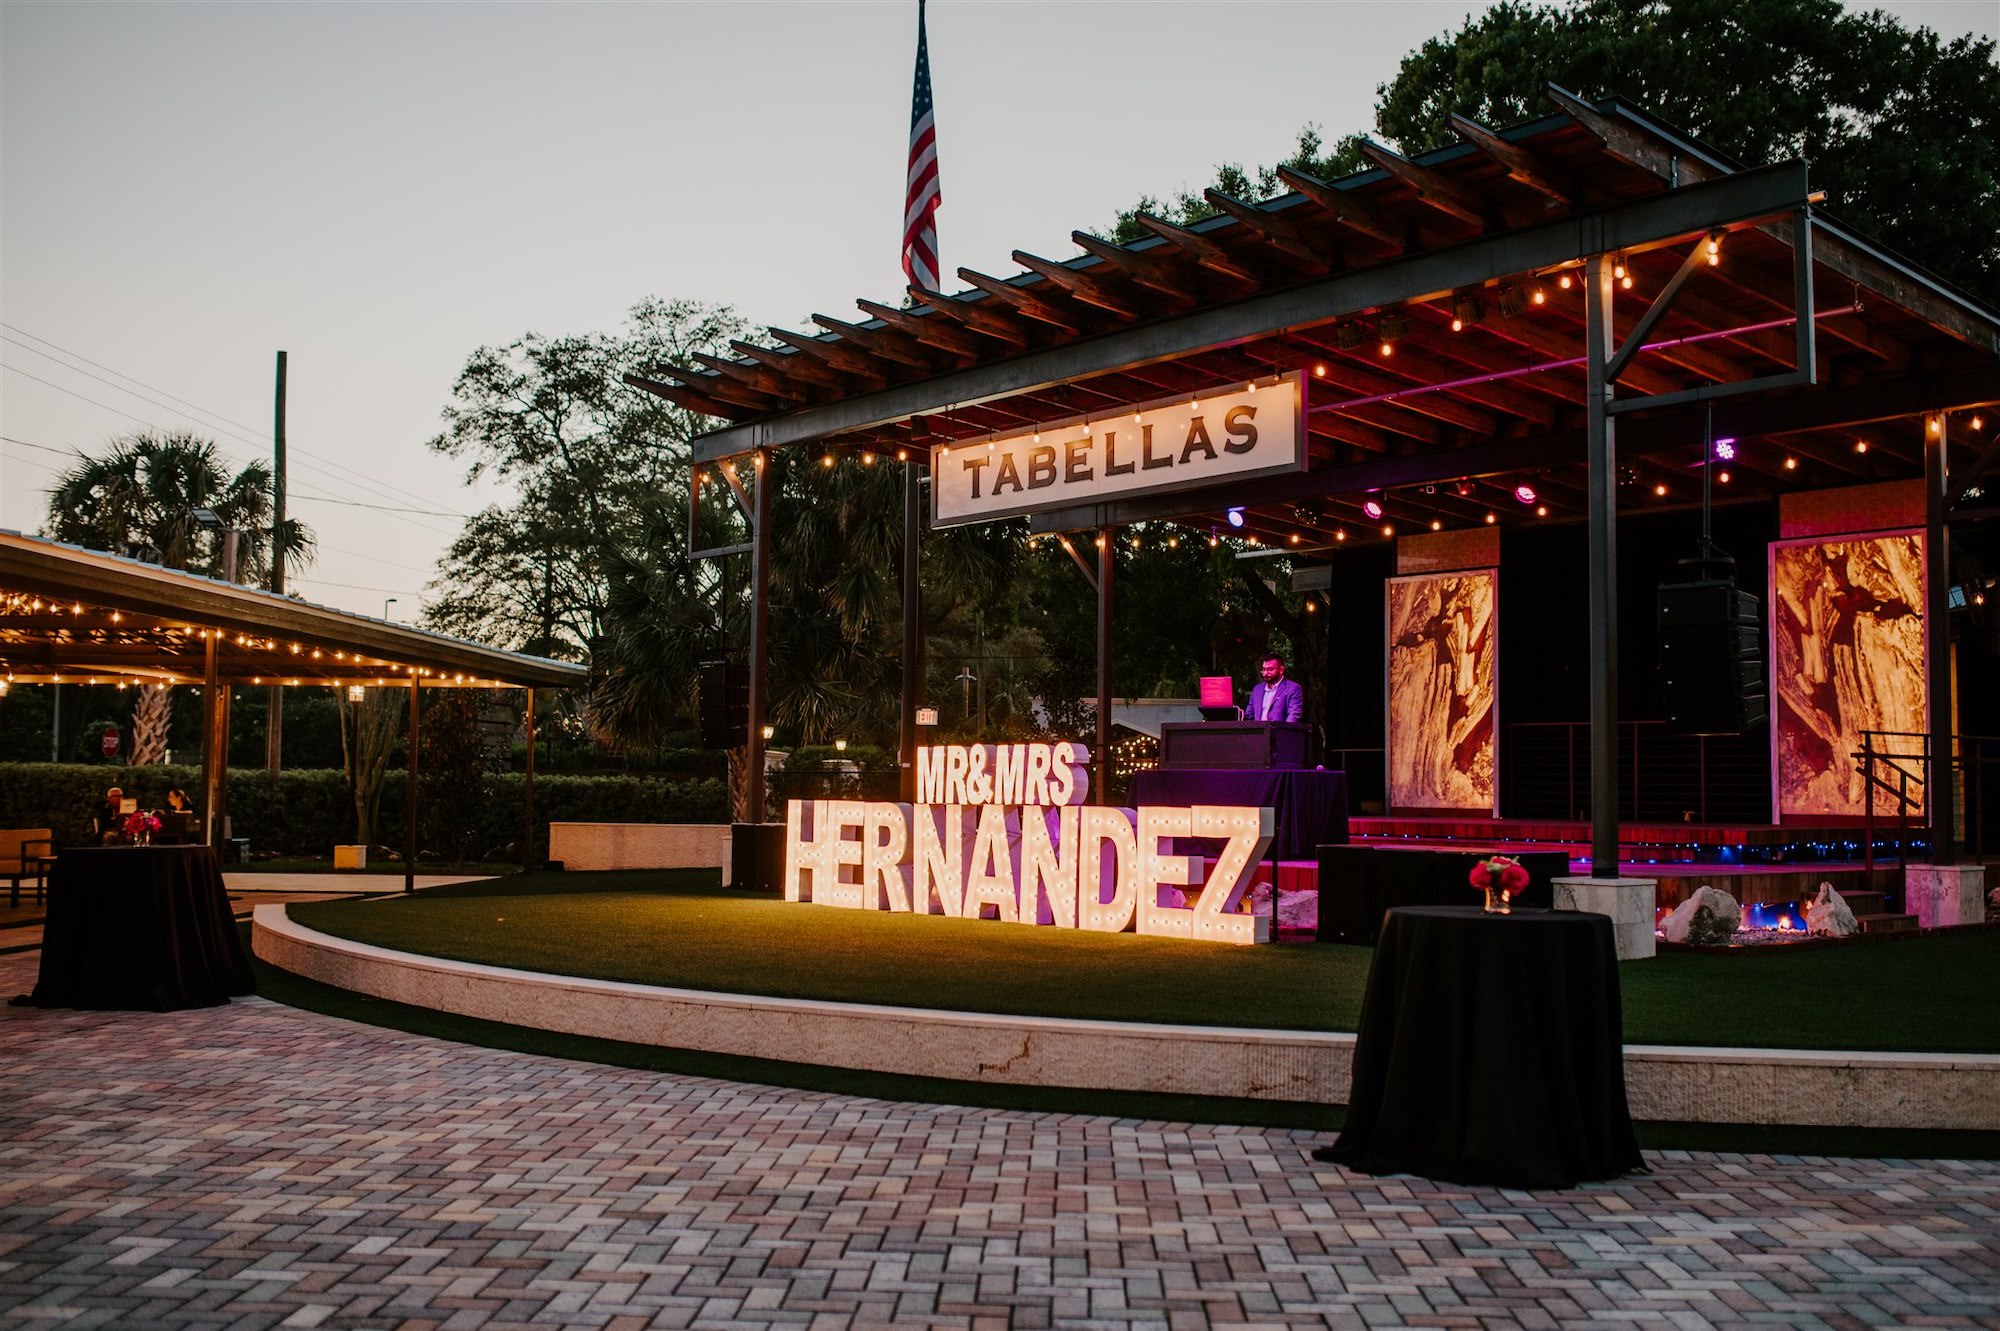 Bride and Groom Name Big Tall Light Up Letters | Reception Decor Inspiration | Tampa Bay Wedding Venue Tabellas at Delaney Creek